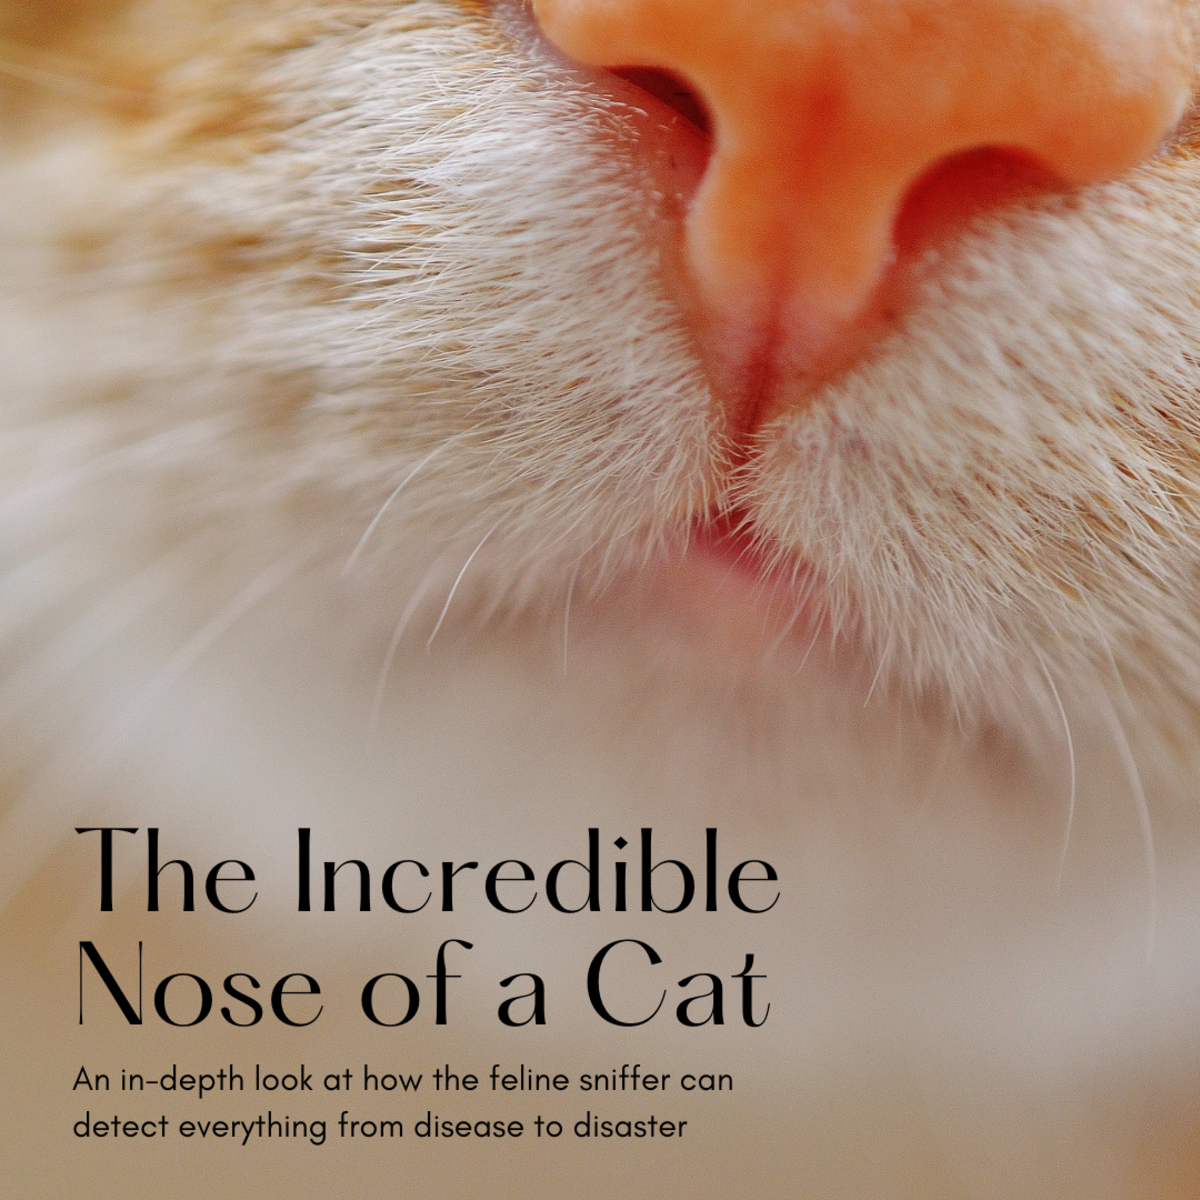 A Cat's Nose Can Find Disease, Disaster, and Death